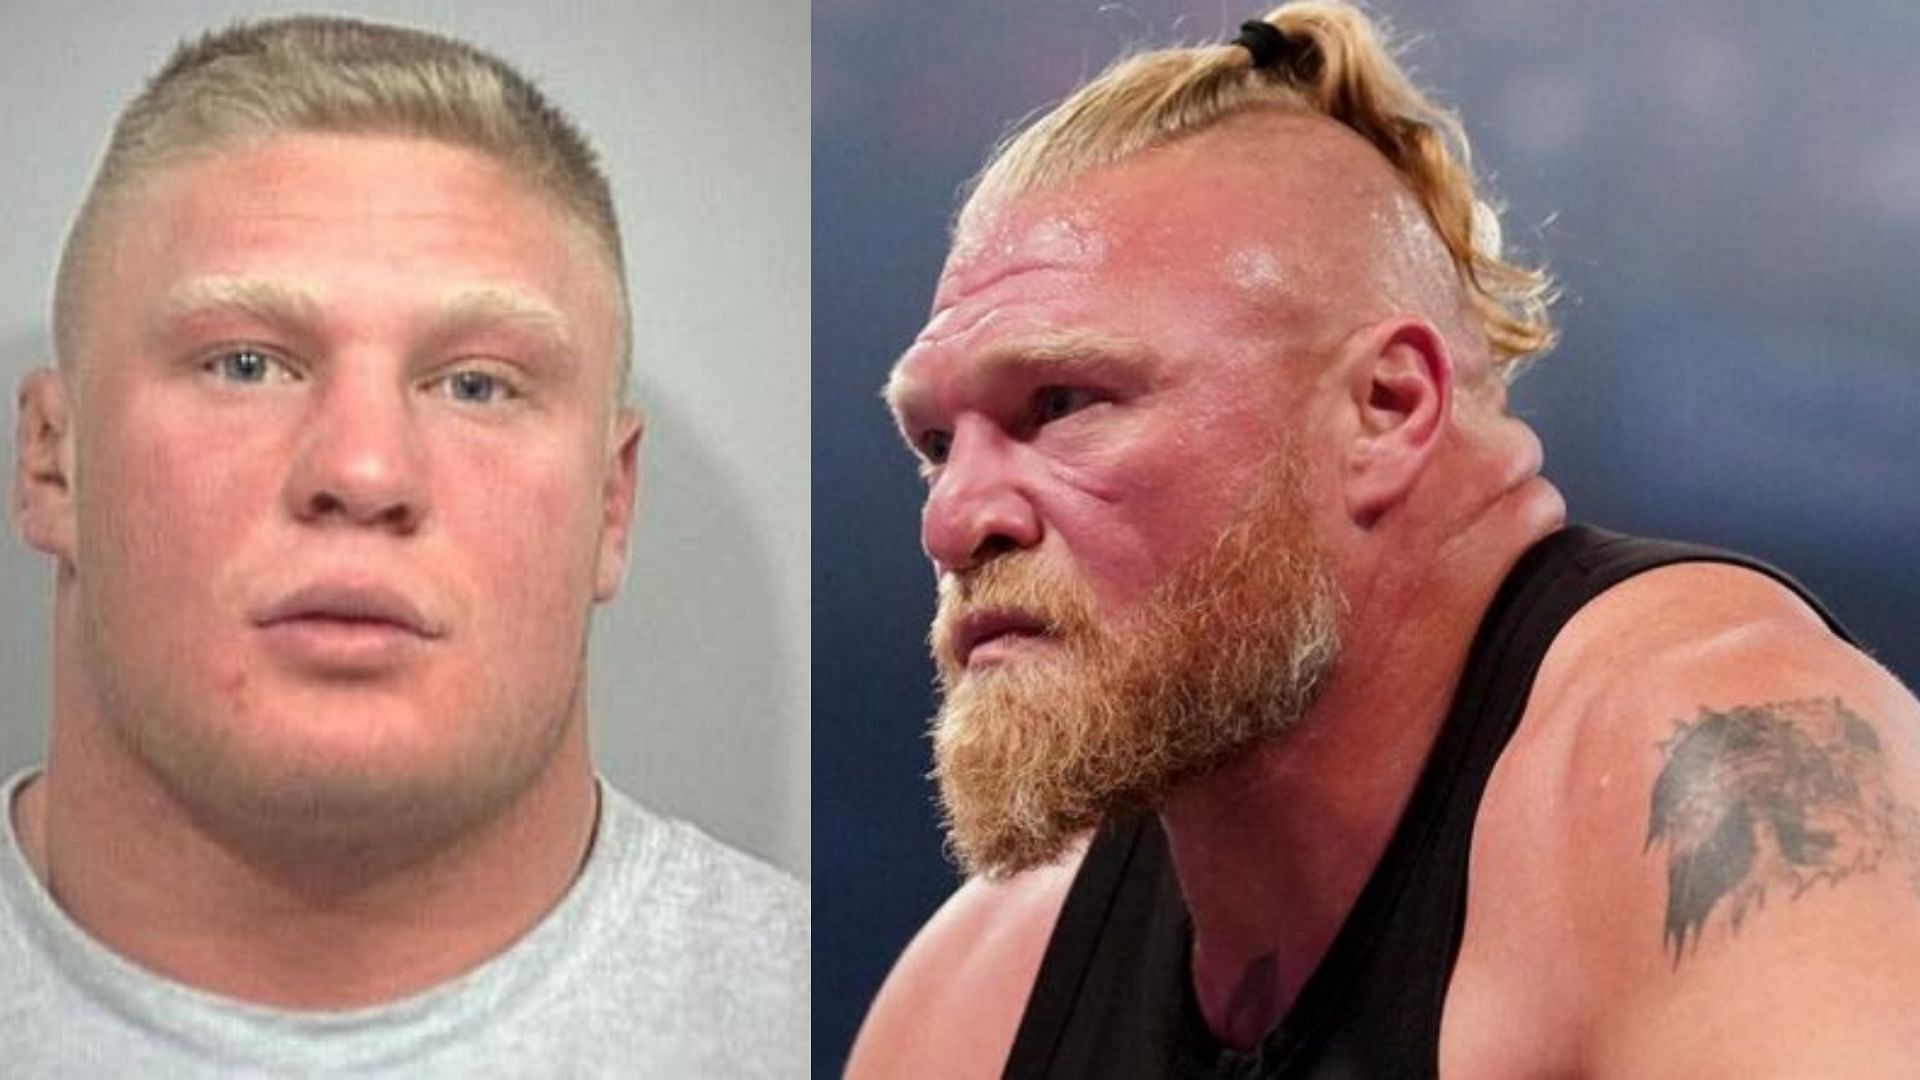 Brock Lesnar was arrested in real life almost two decades ago